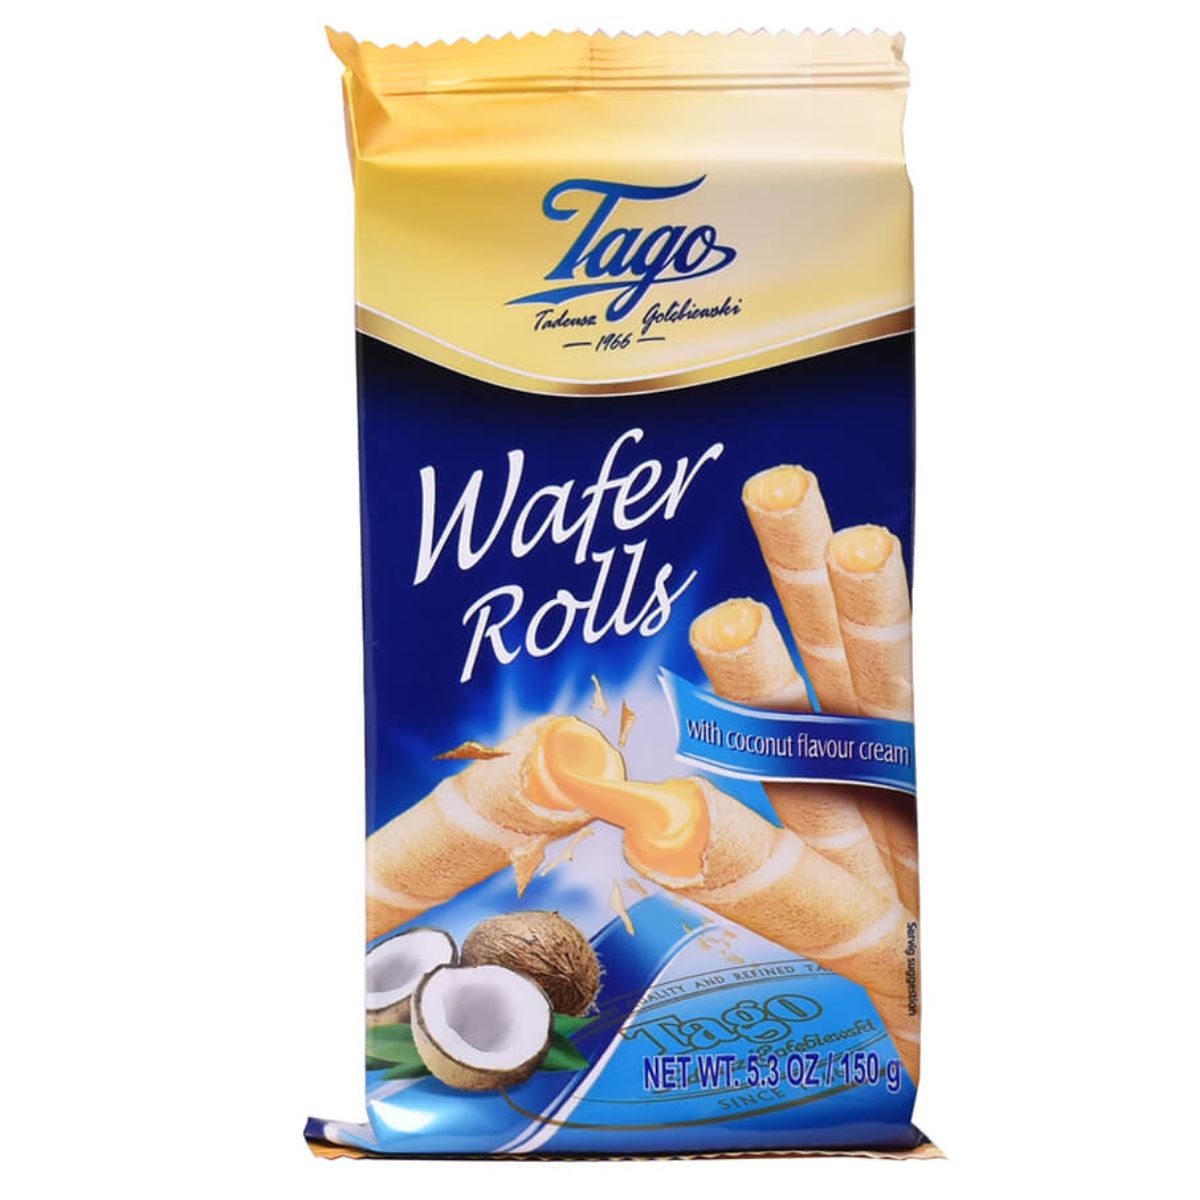 A bag of Tago - Wafer Rolls with Coconut Cream on a white background.